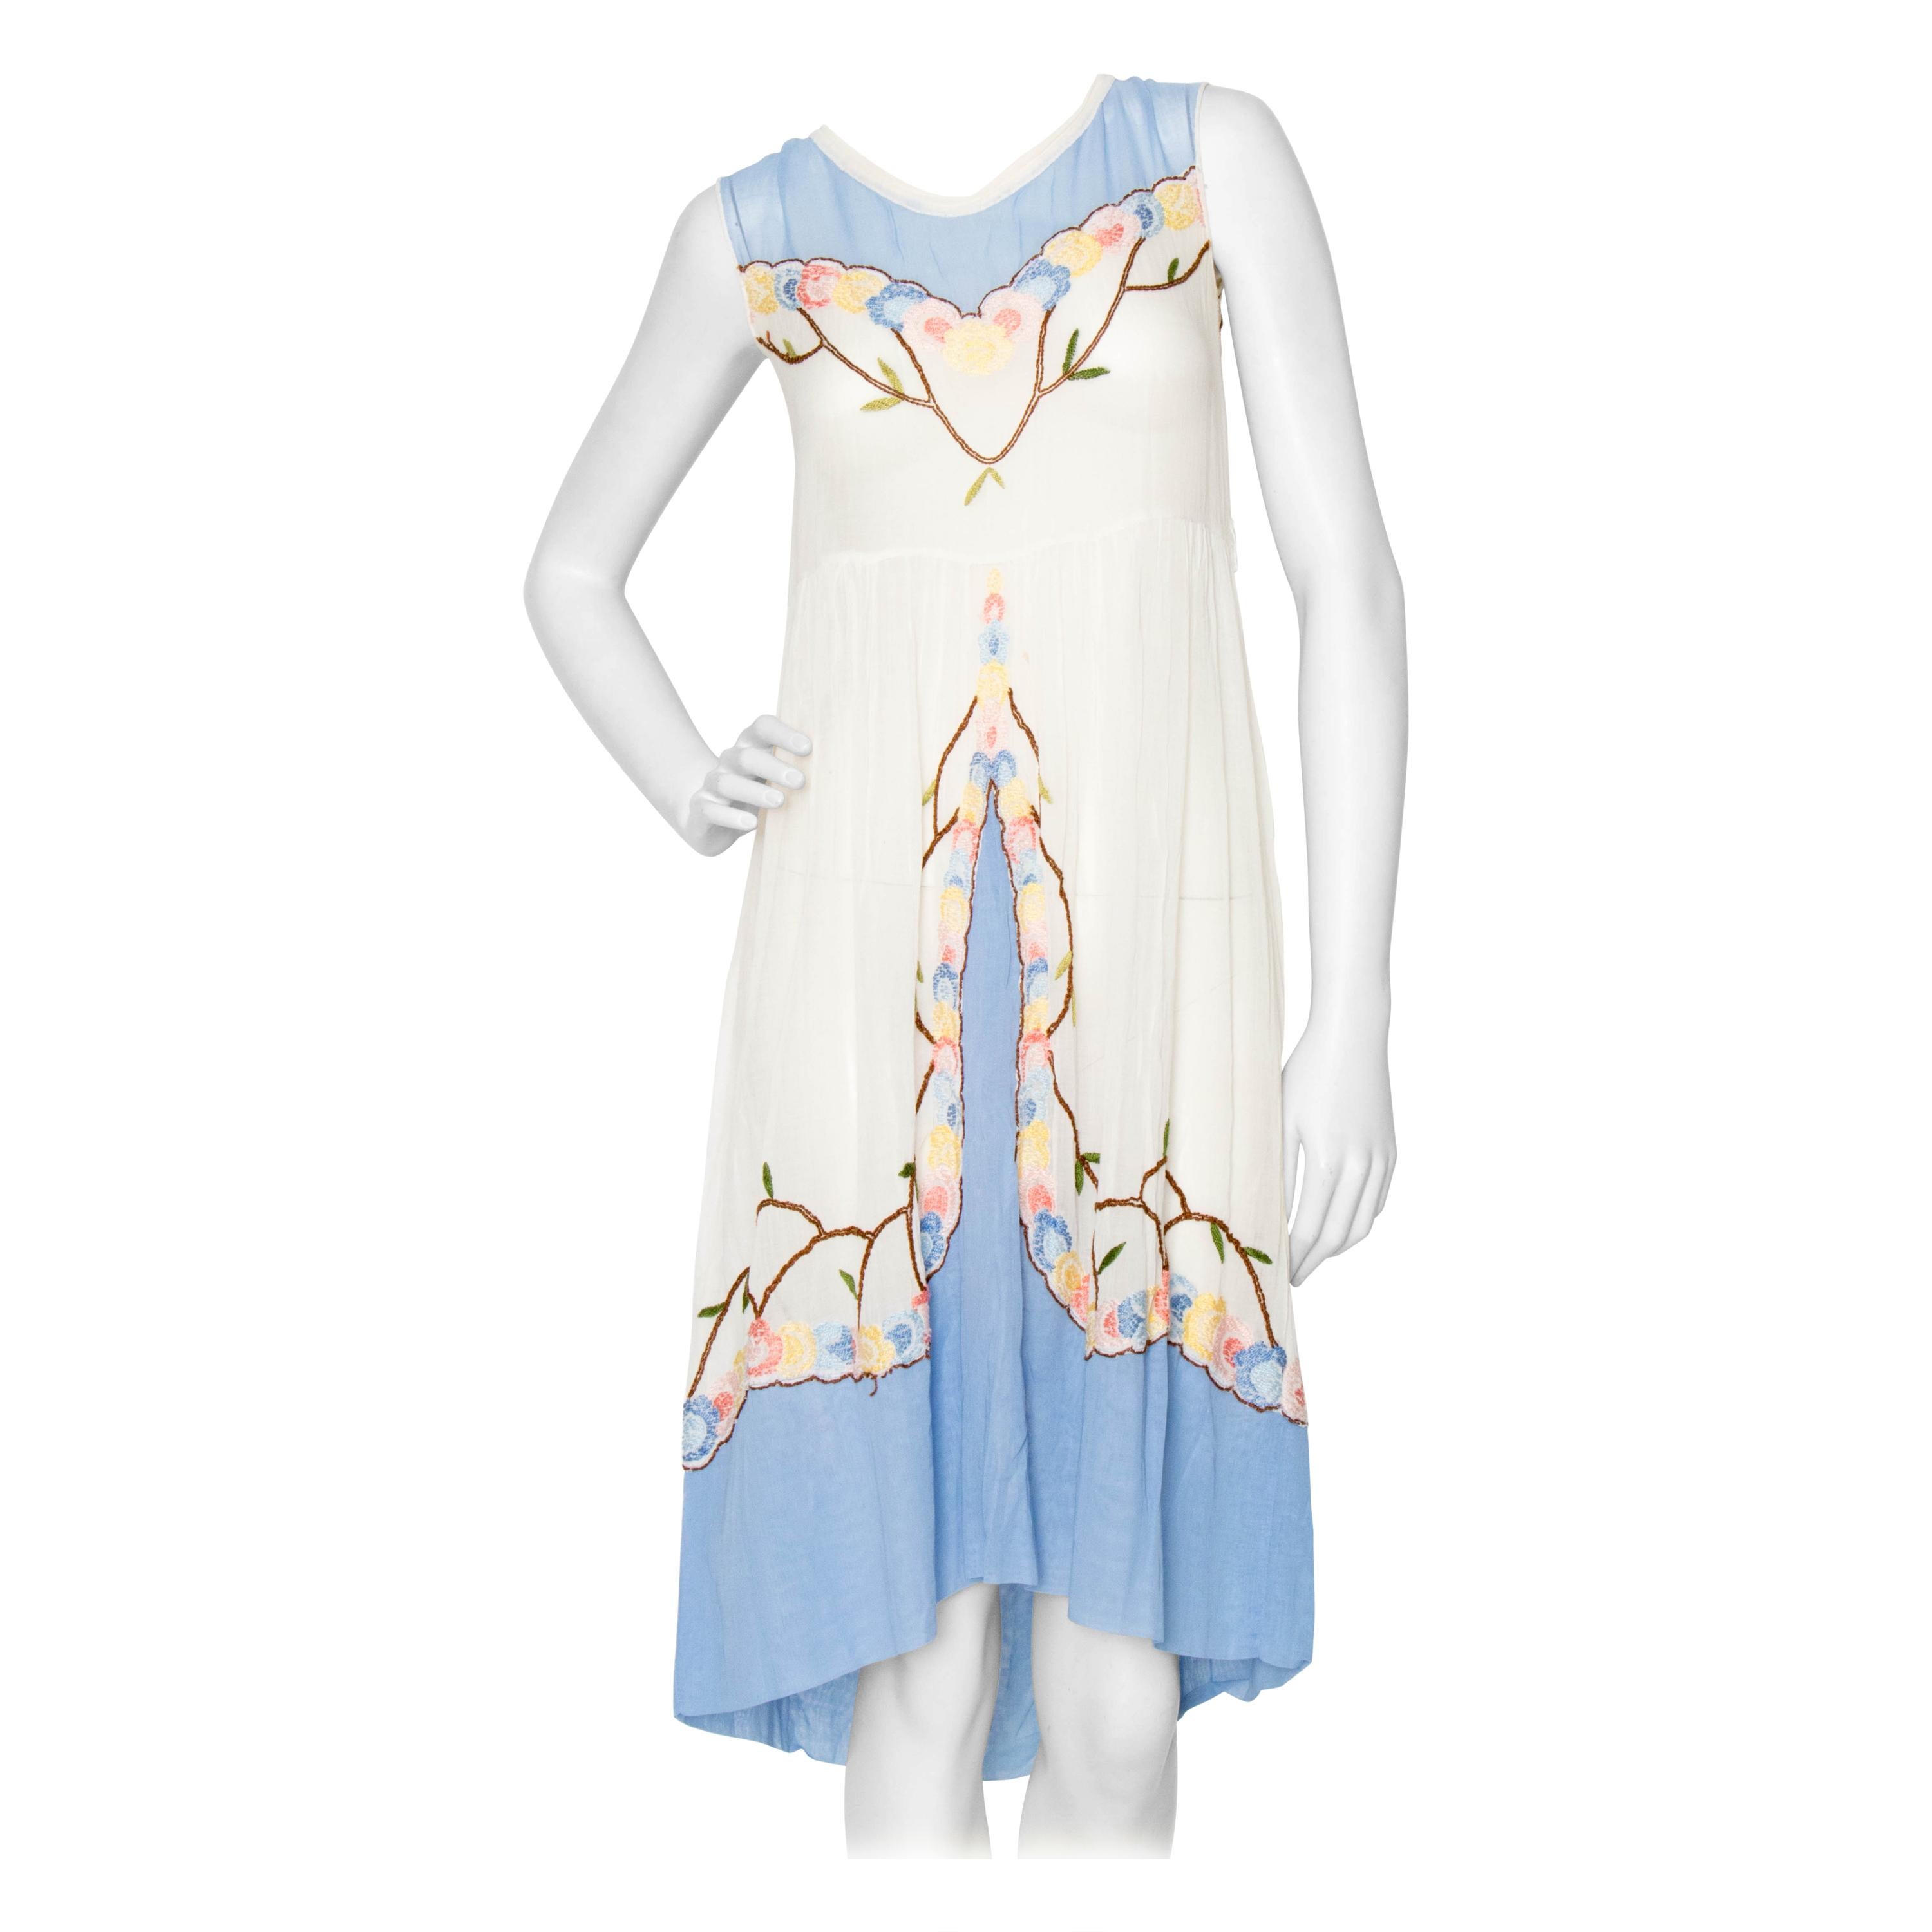 A French 1920s Vintage Embroidered Cotton Dress